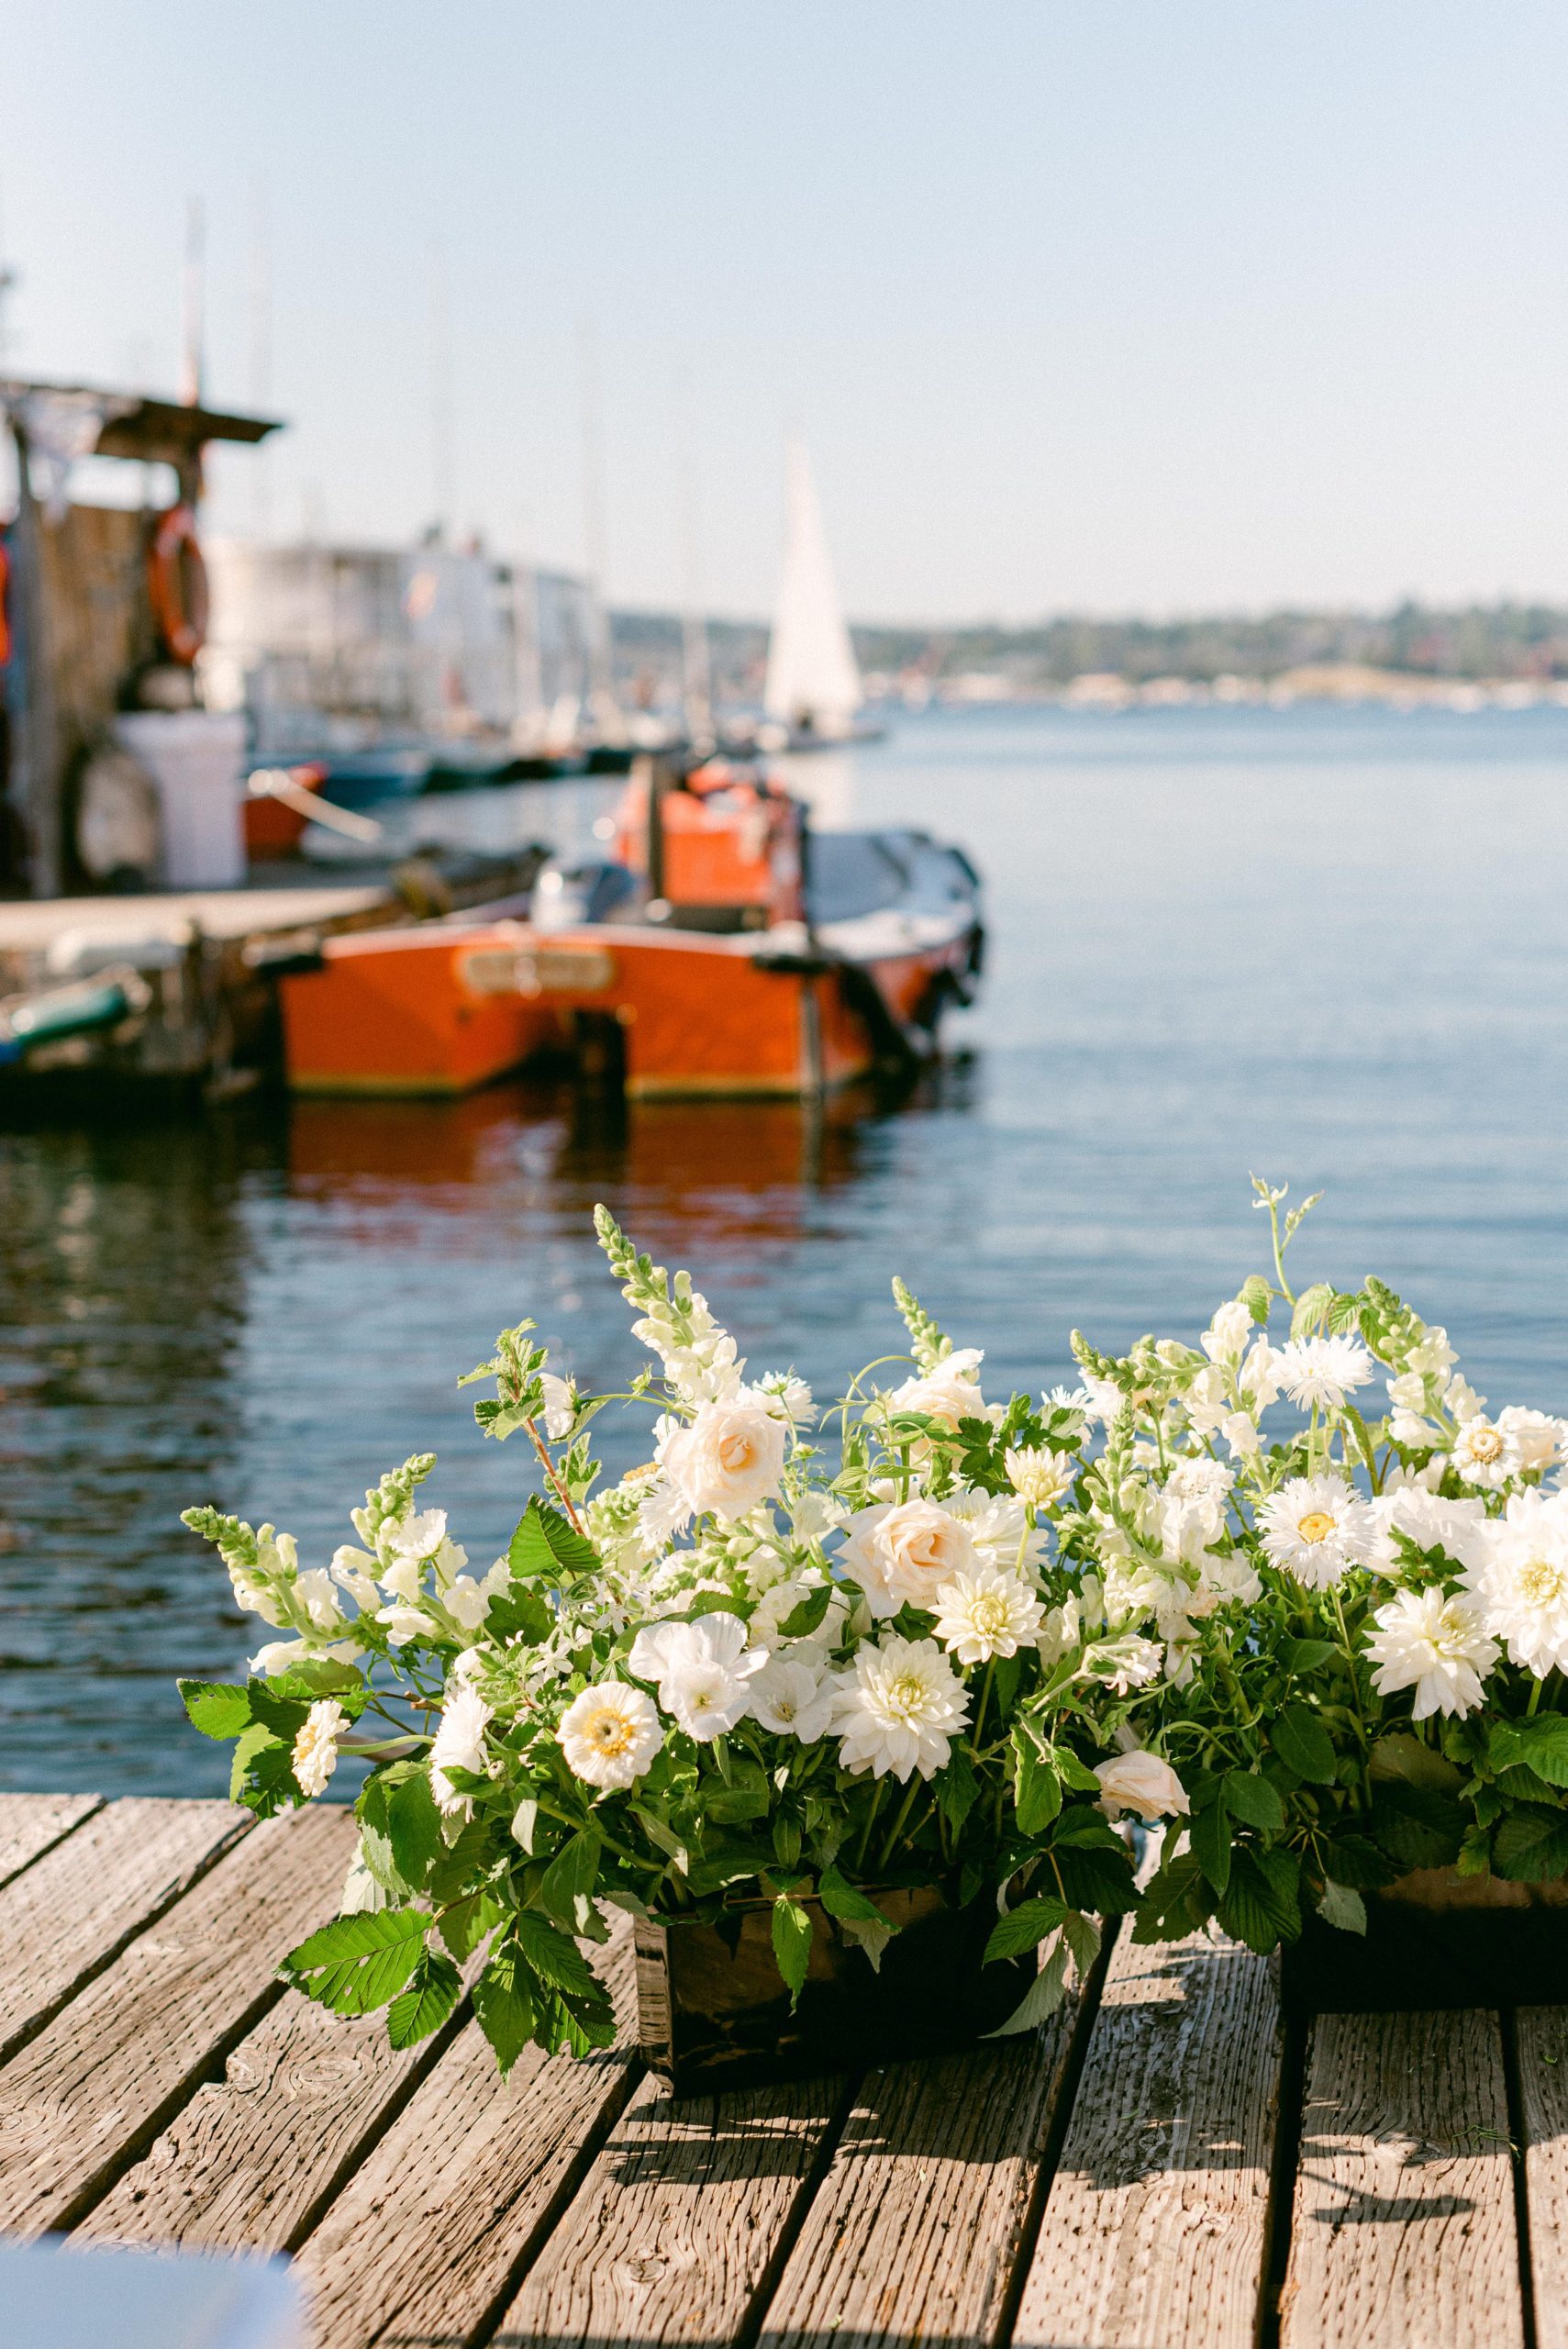 Seattle Washington, The Center for Wooden Boats Wedding Venue. Wedding floral arrangement on the docks. Water and boats in the background.